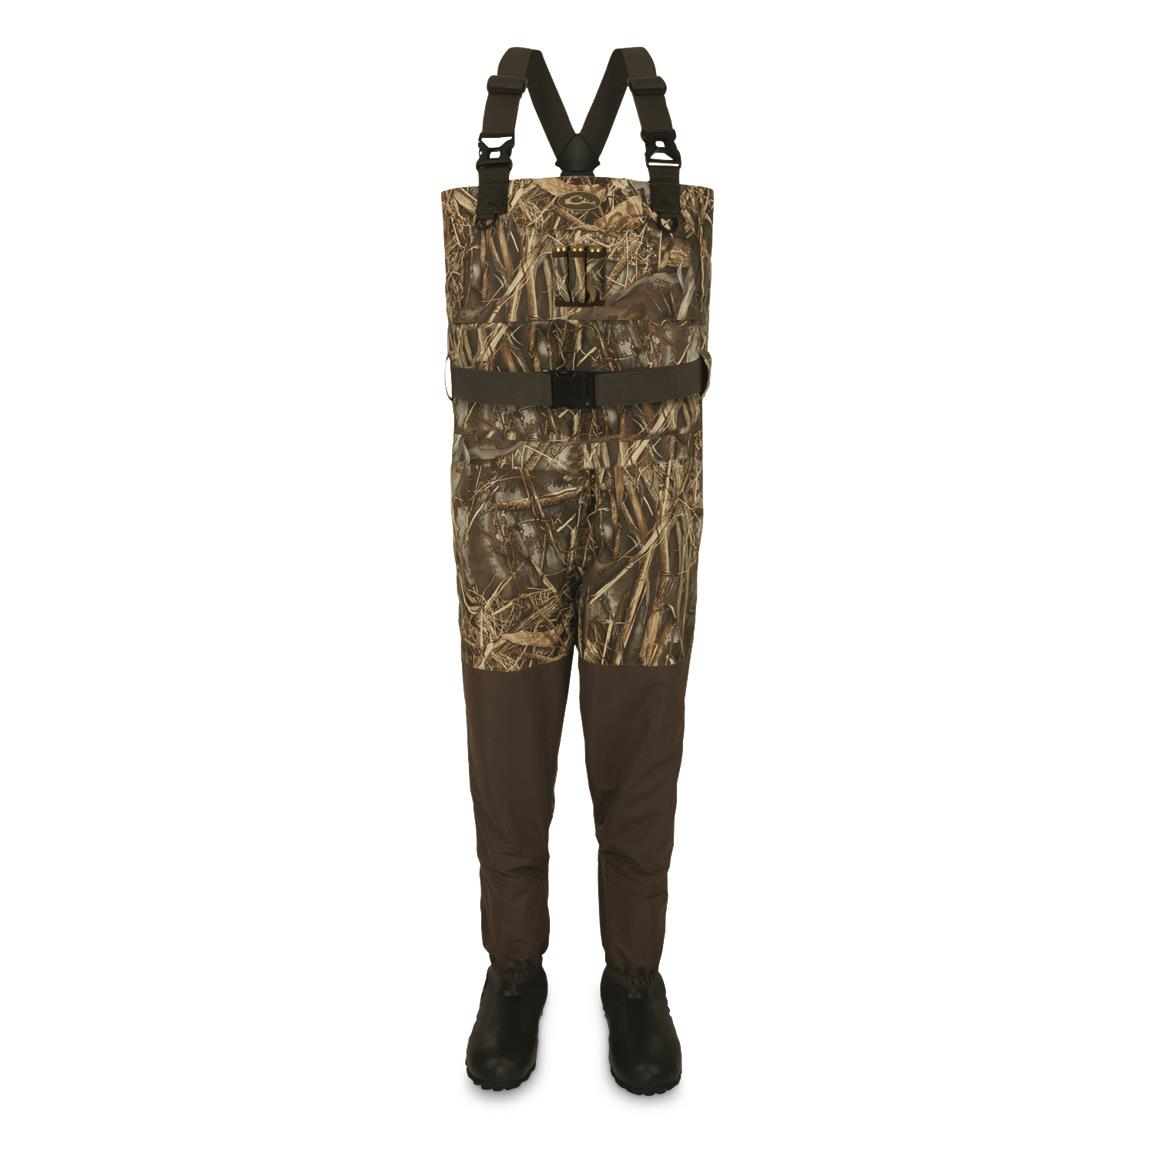 Drake Waterfowl Women's Eqwader Breathable Insulated Waders, 1,600-gram, Realtree Max-7